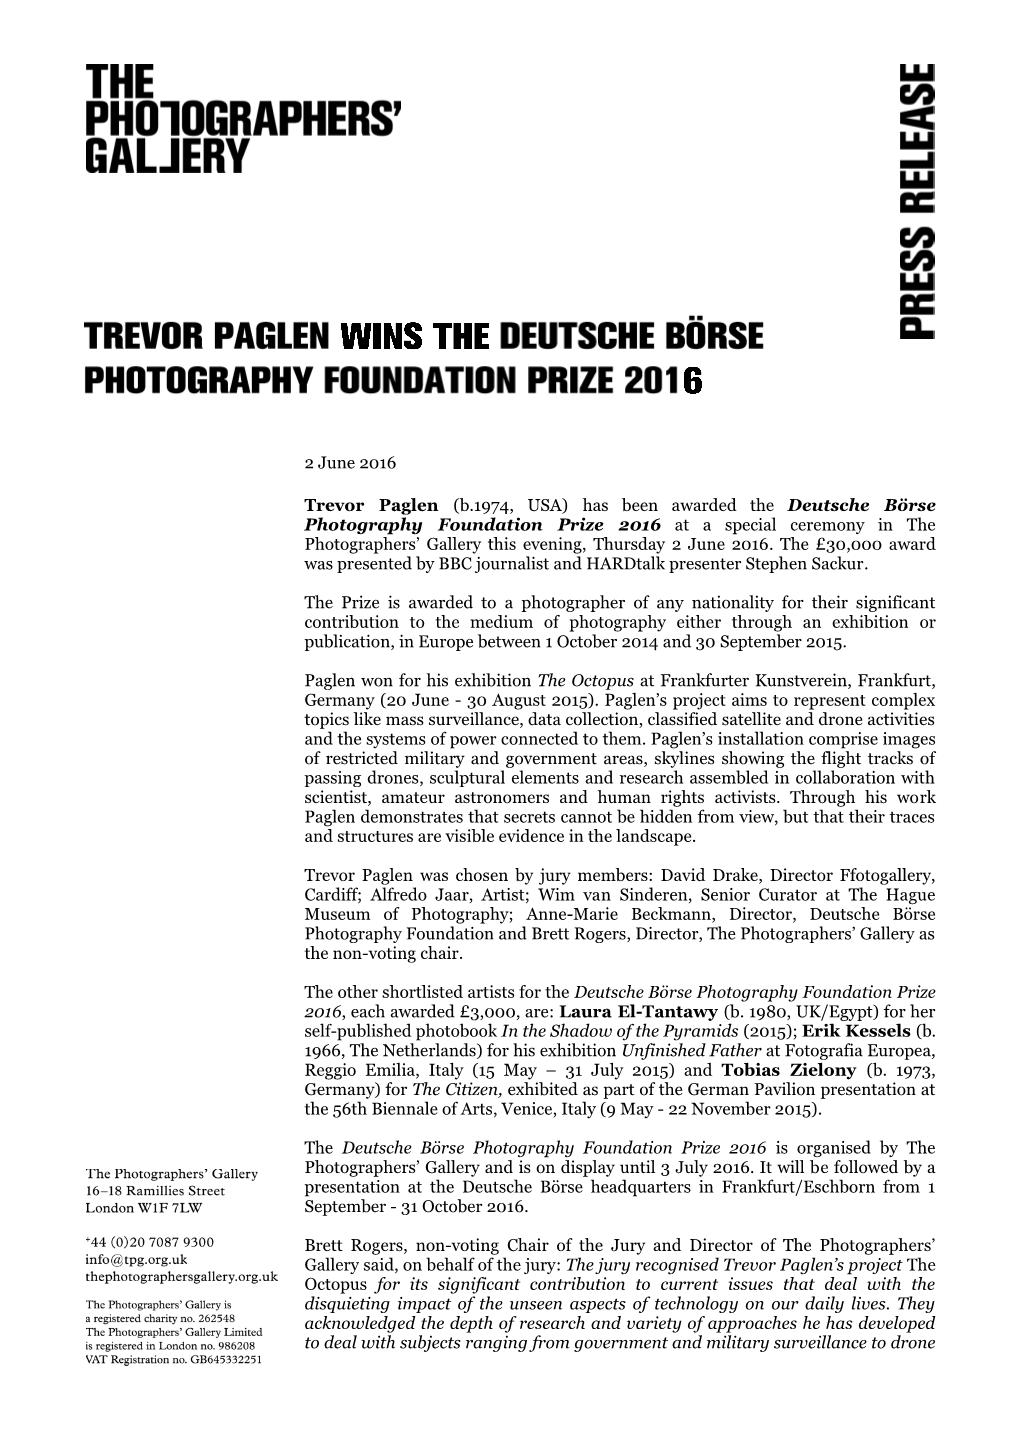 Has Been Awarded the Deutsche Börse Photography Foundation Prize 2016 at a Special Ceremony in the Photographers’ Gallery This Evening, Thursday 2 June 2016